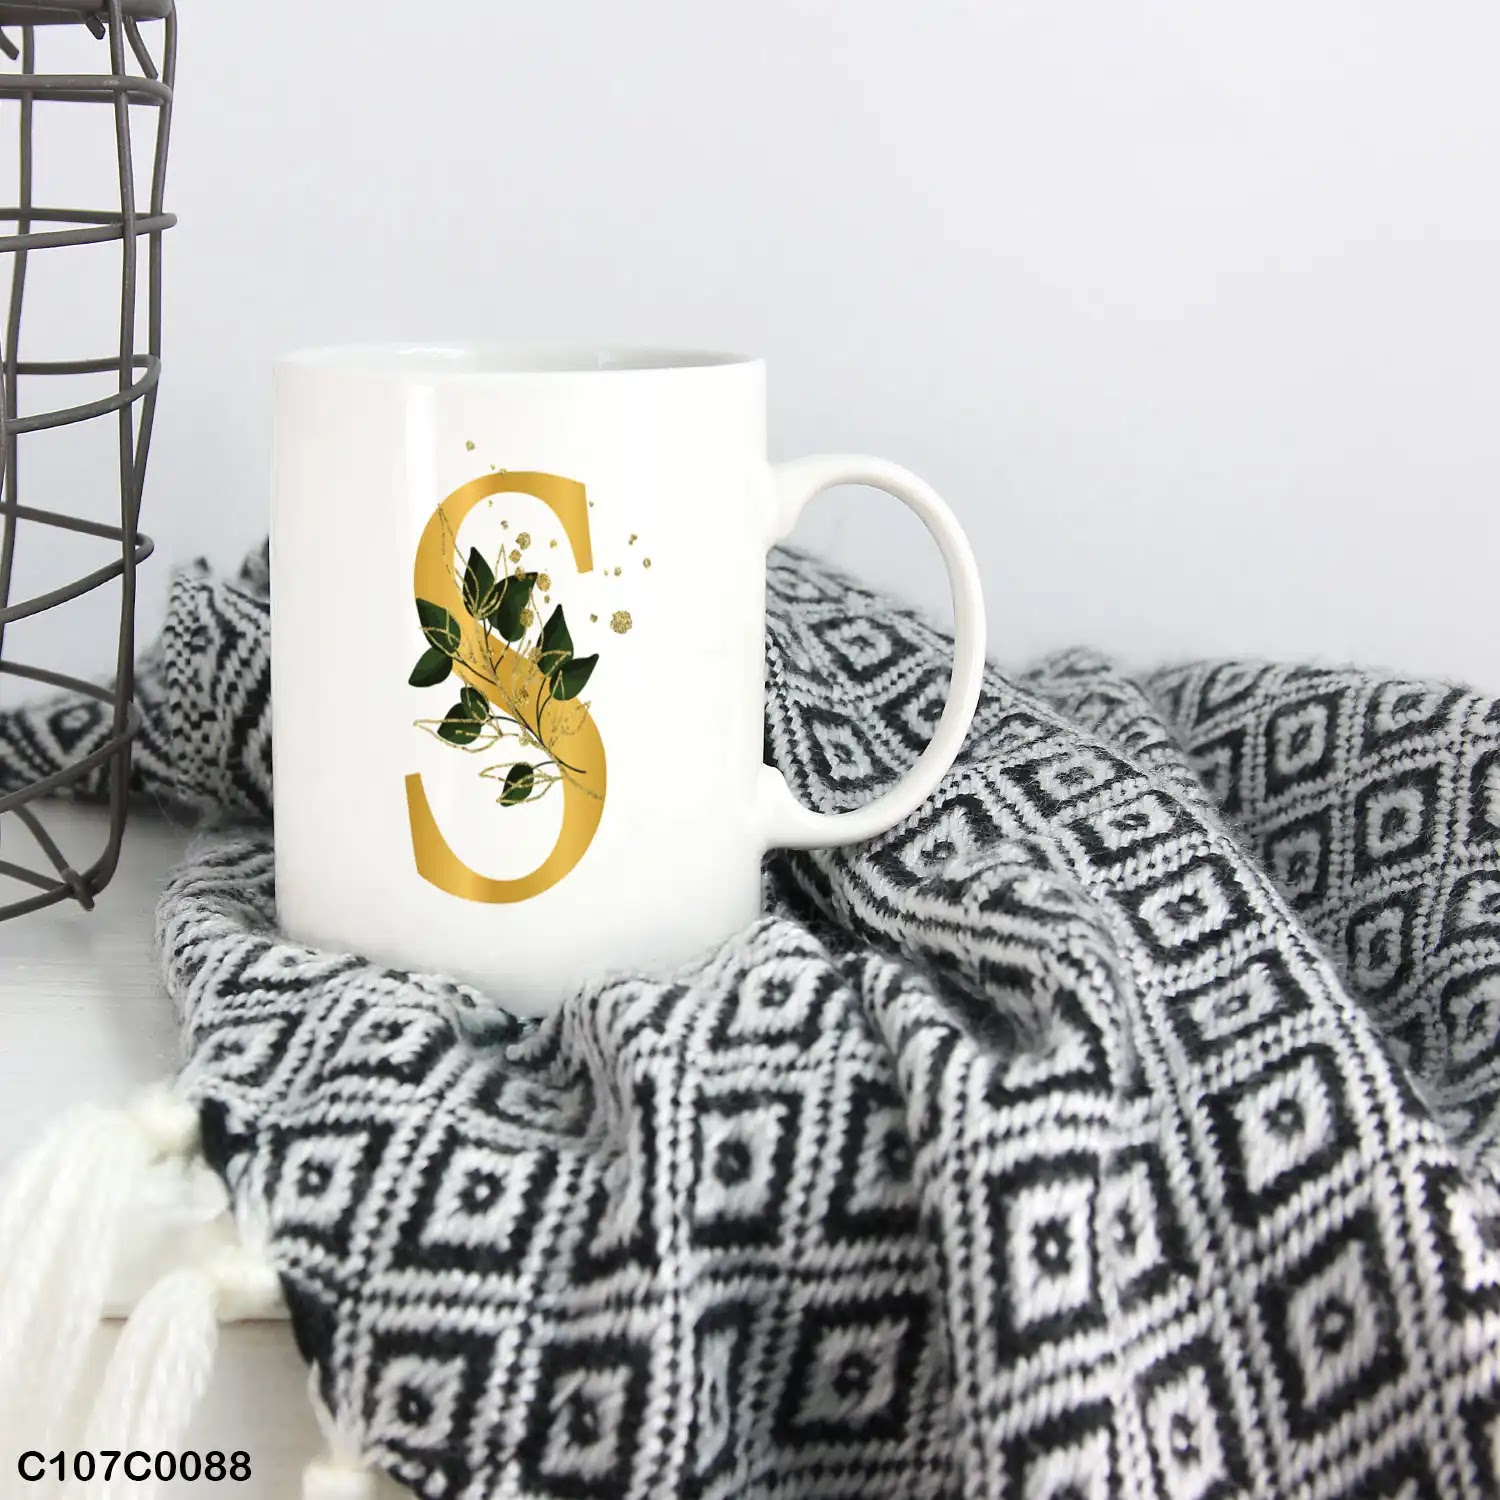 A white mug (cup) printed with gold Letter "S" and small green branch